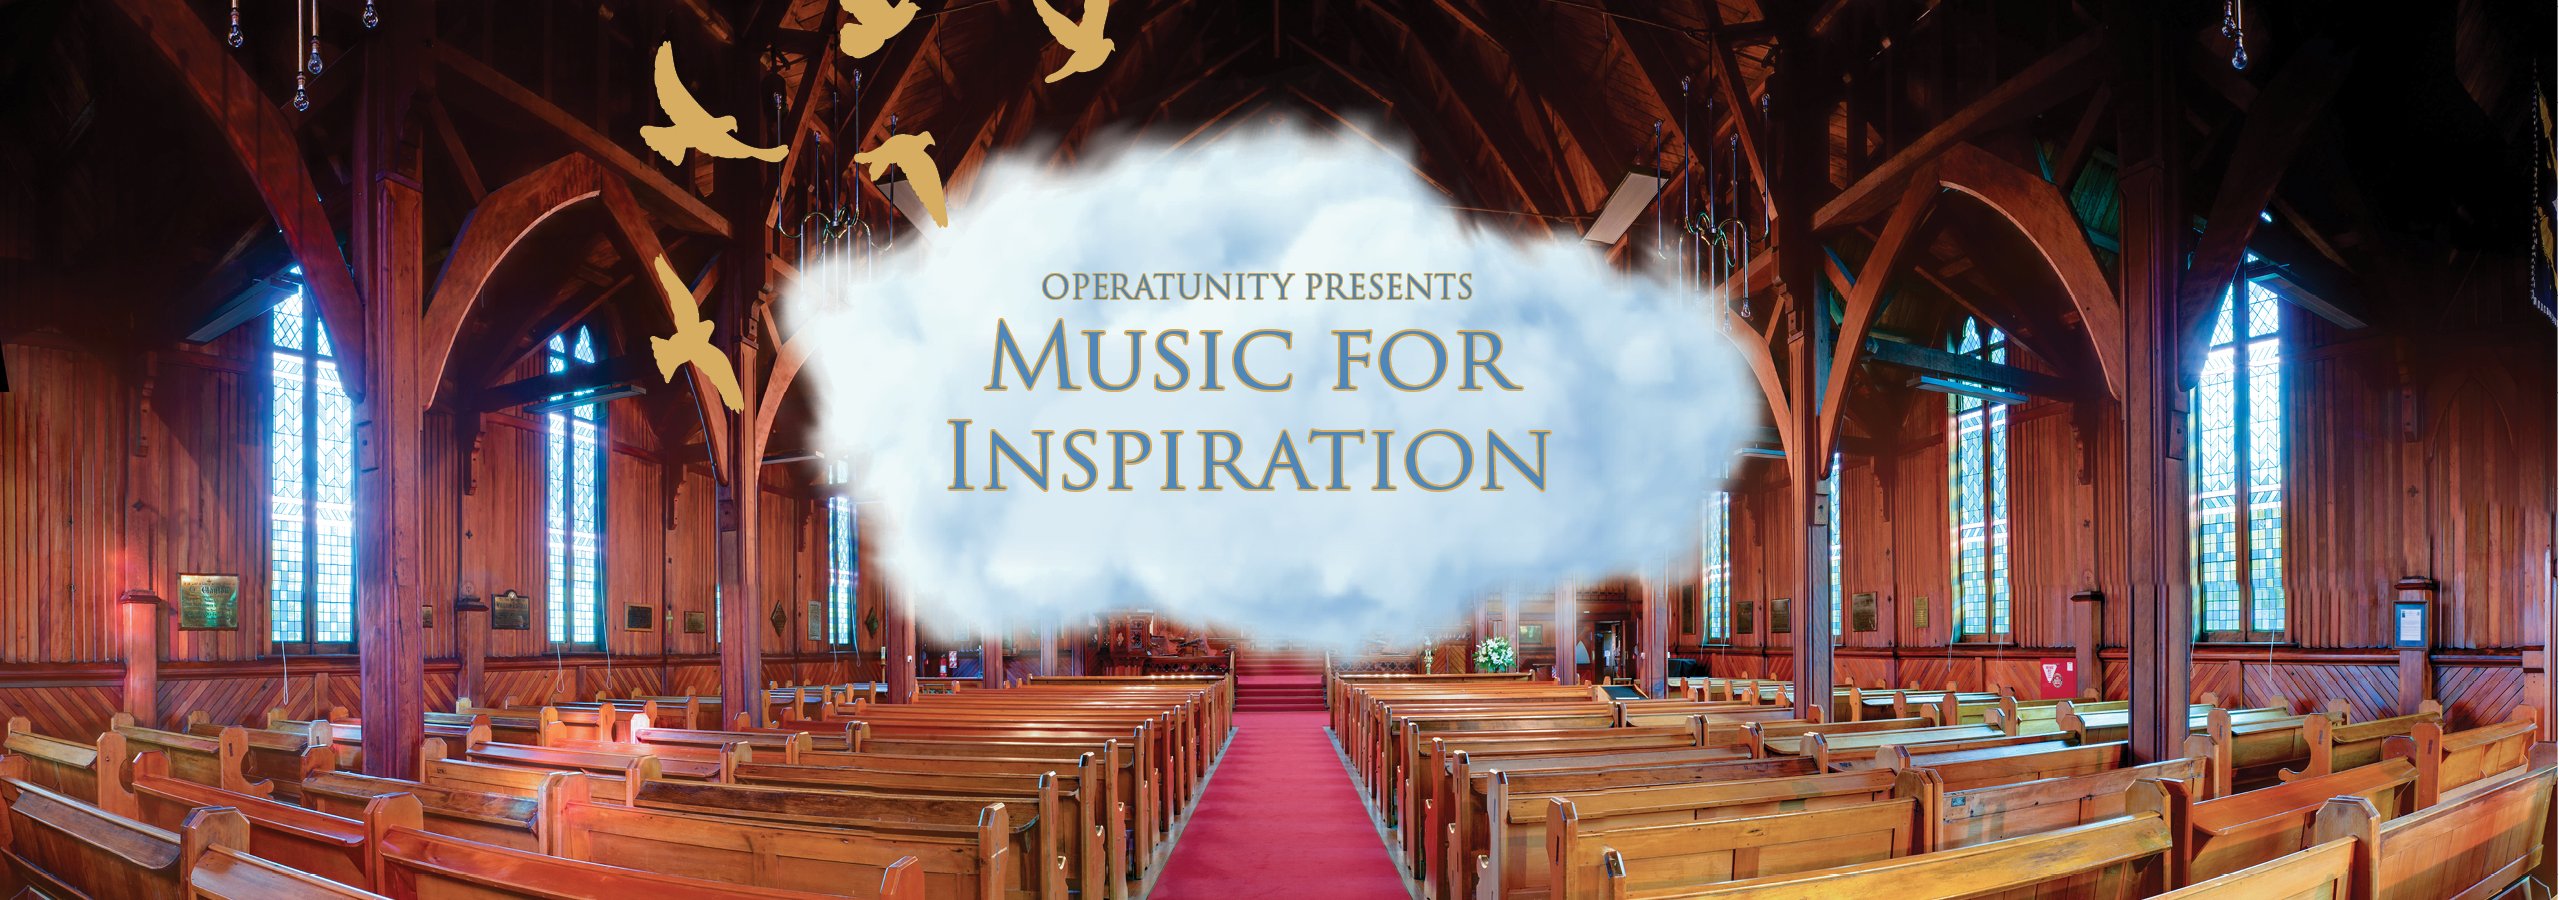 Concerts of Note - Music for Inspiration